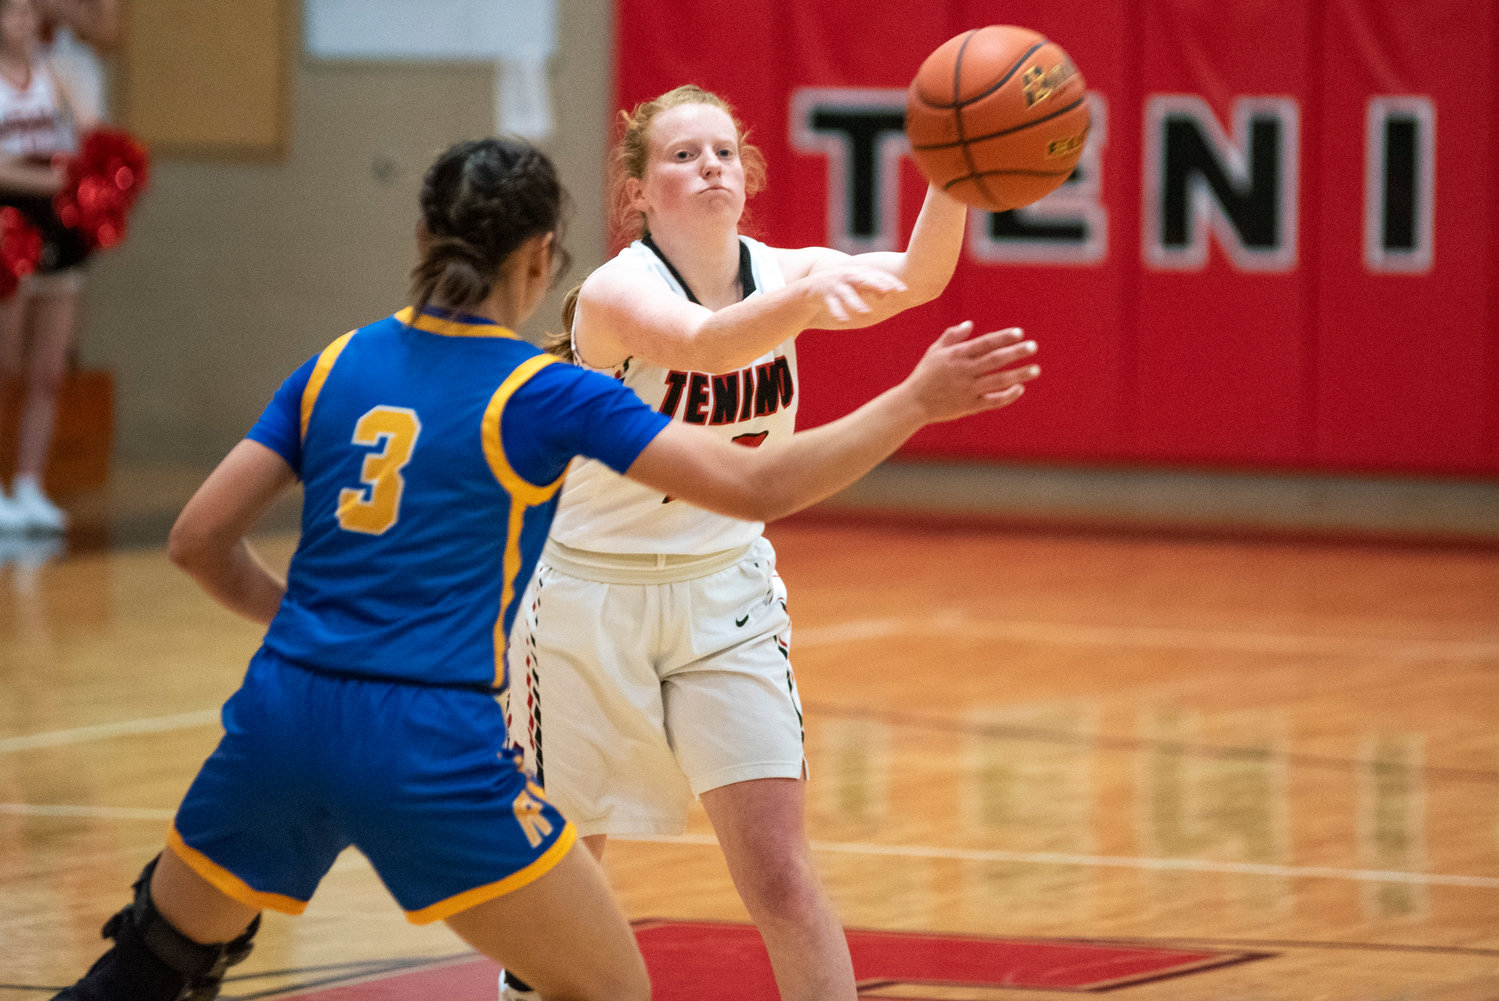 Tenino's Abby Severse (12) dishes off a pass against Rochester's Sadie Knutson (3) on Dec. 2.